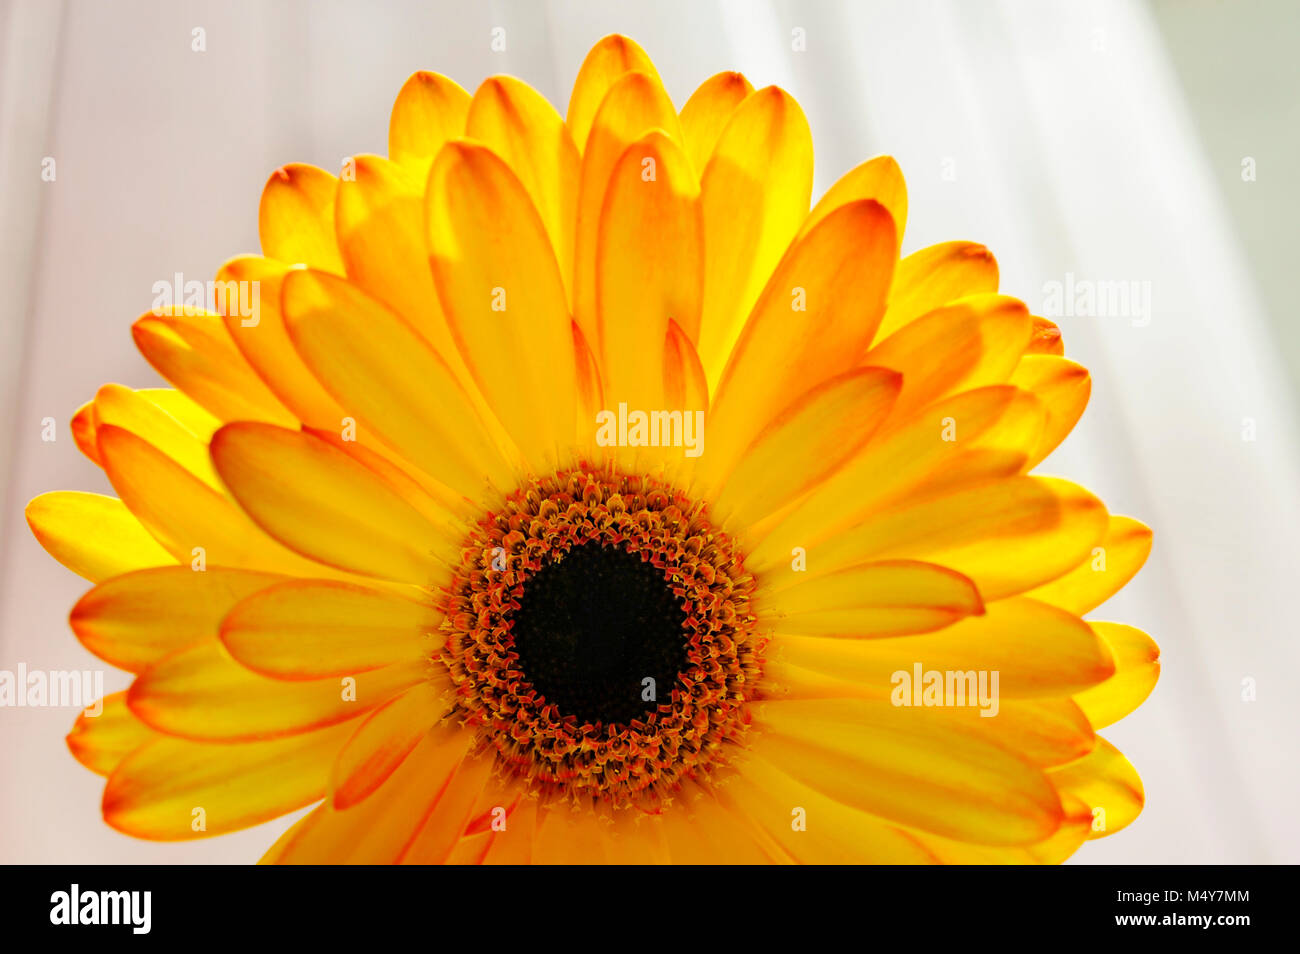 Gerbera is very popular and widely used as a decorative garden plant or as cut flowers. Stock Photo